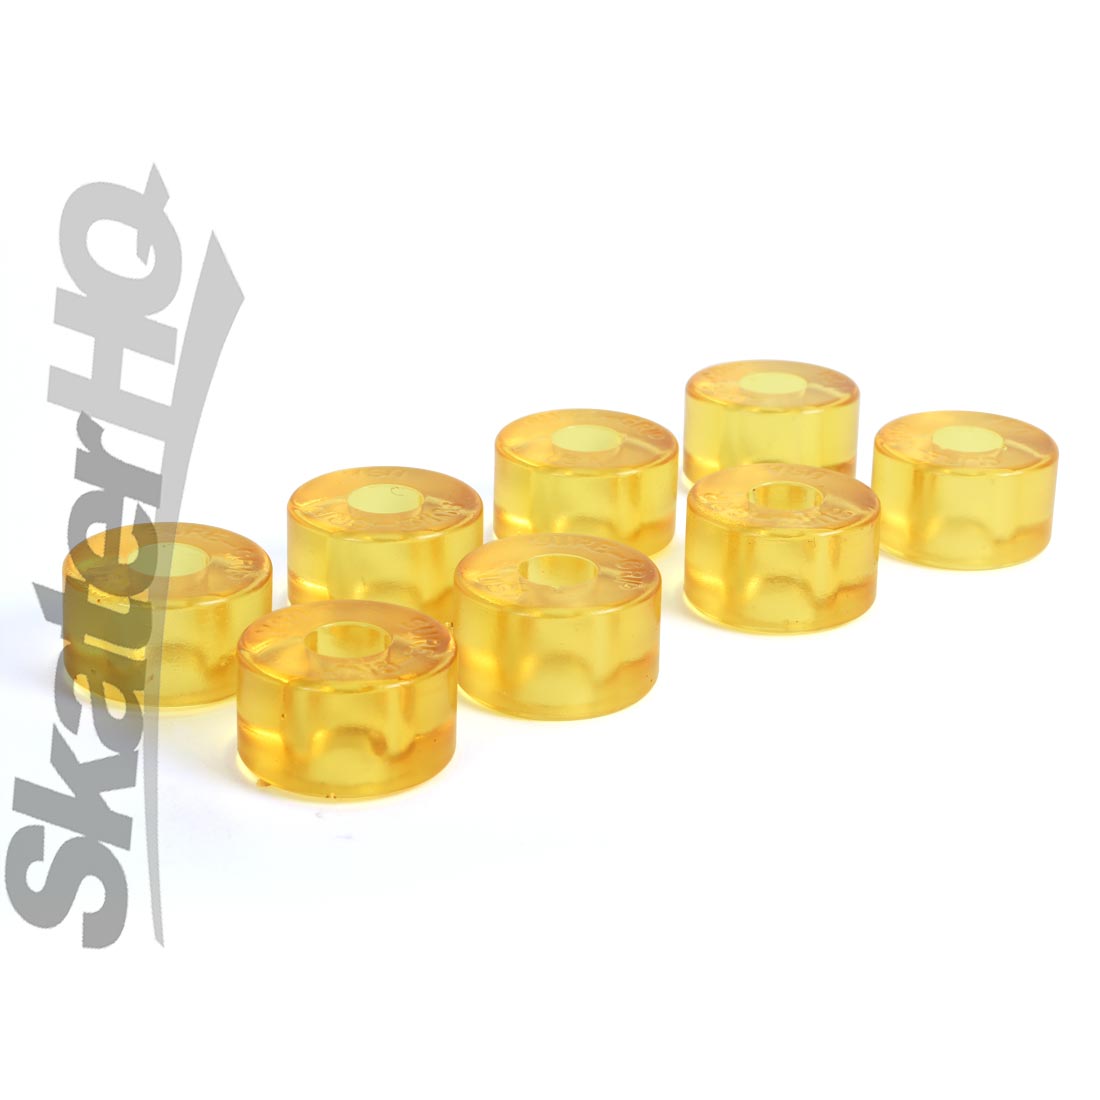 Sure-Grip Barrel Cushions 79a 8pk - Yellow Roller Skate Hardware and Parts